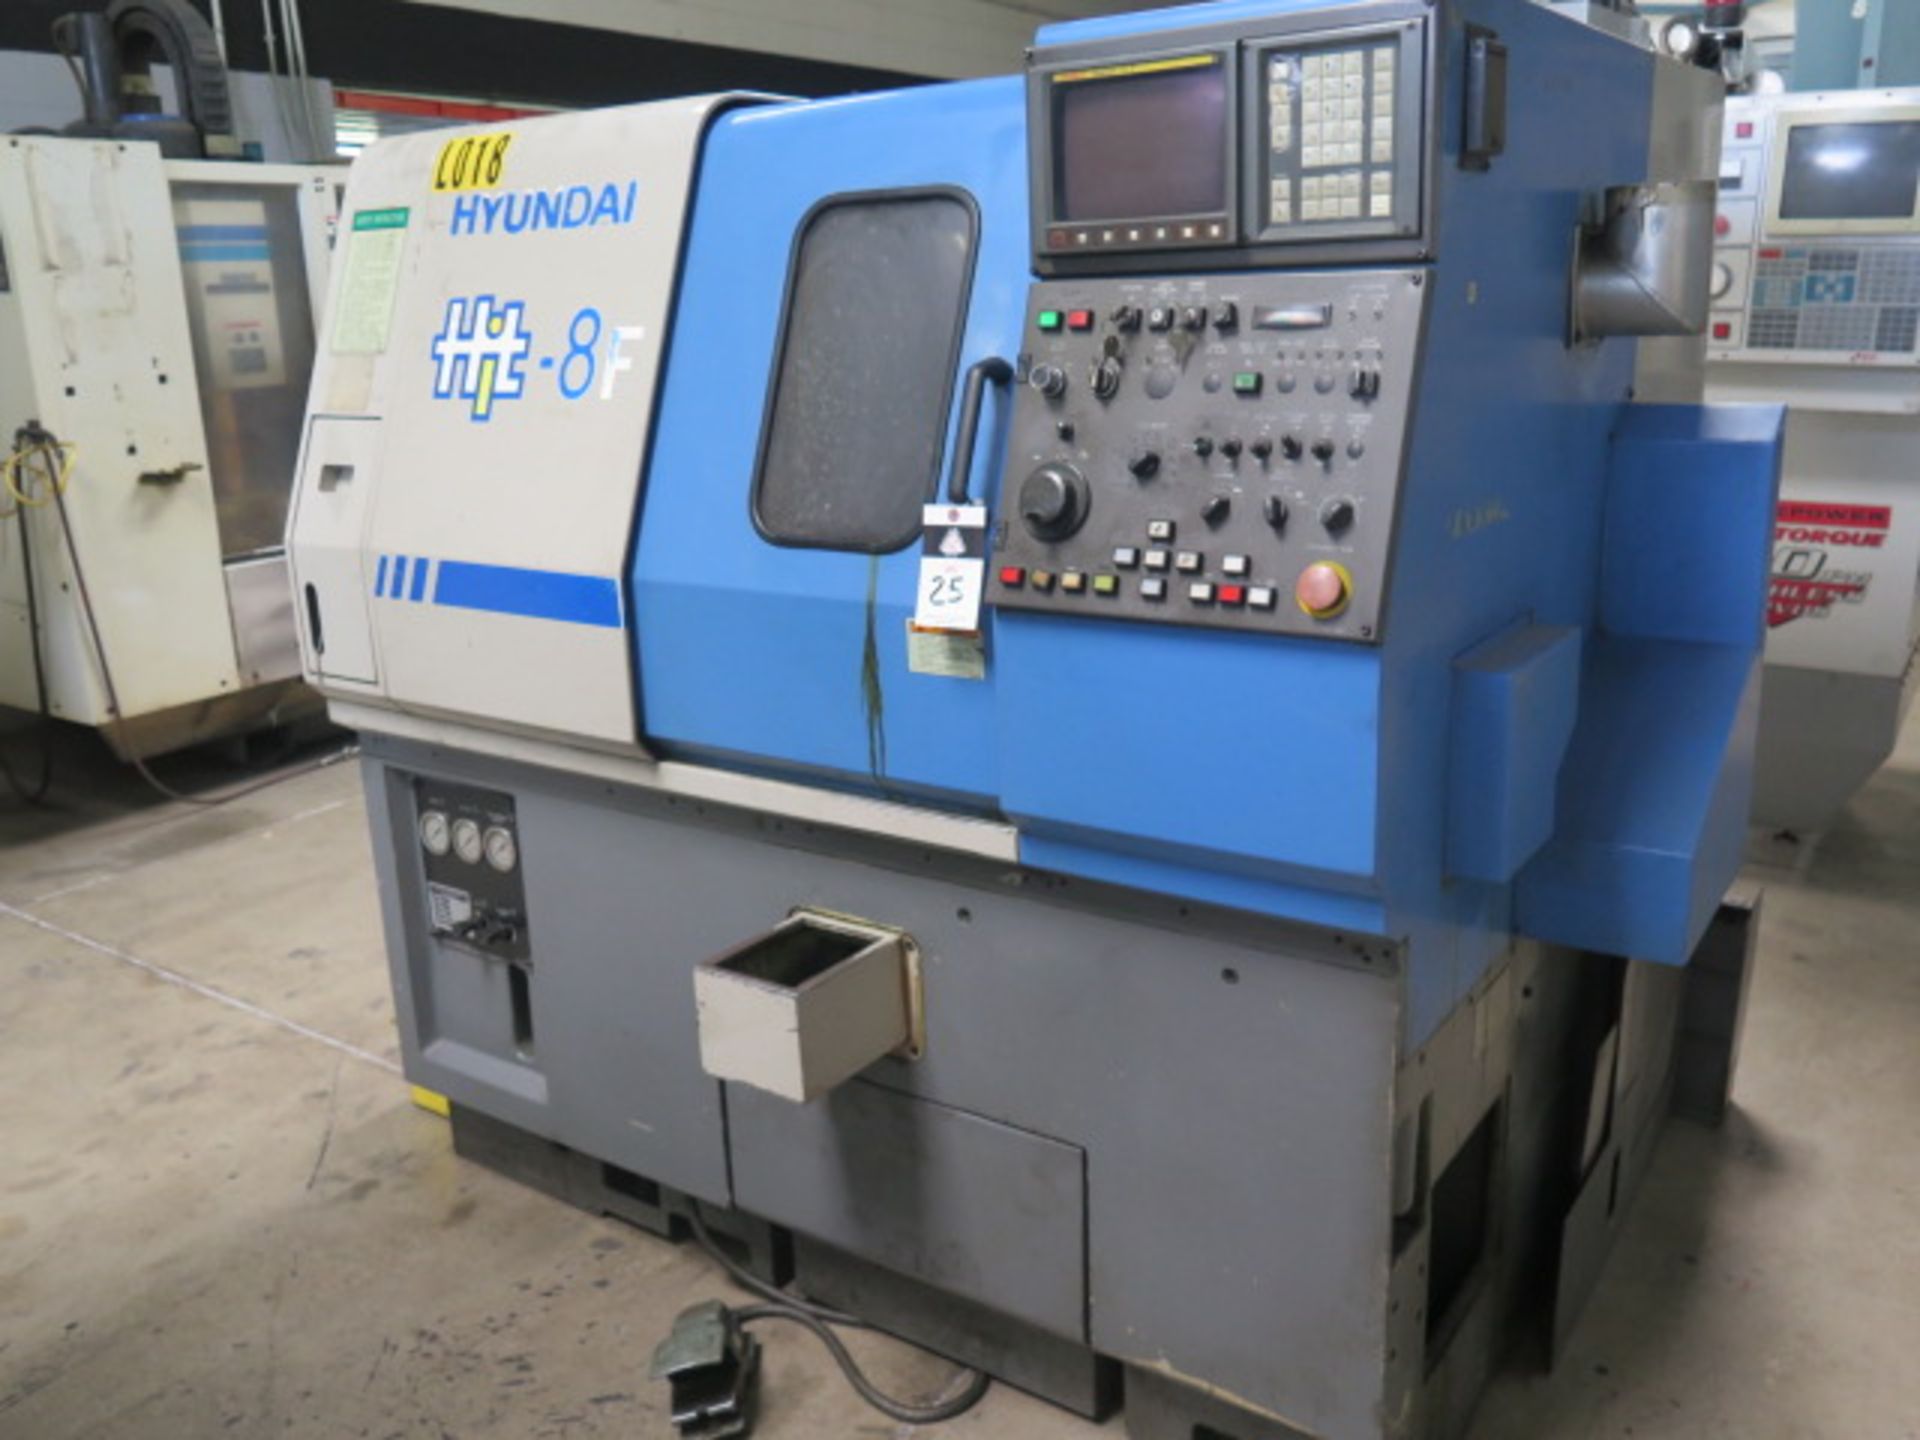 Hyundai Hit-8F CNC Turning Center s/n 14757011 w/ Fanuc 0-T Controls, 8-Station Turret, SOLD AS IS - Image 2 of 14